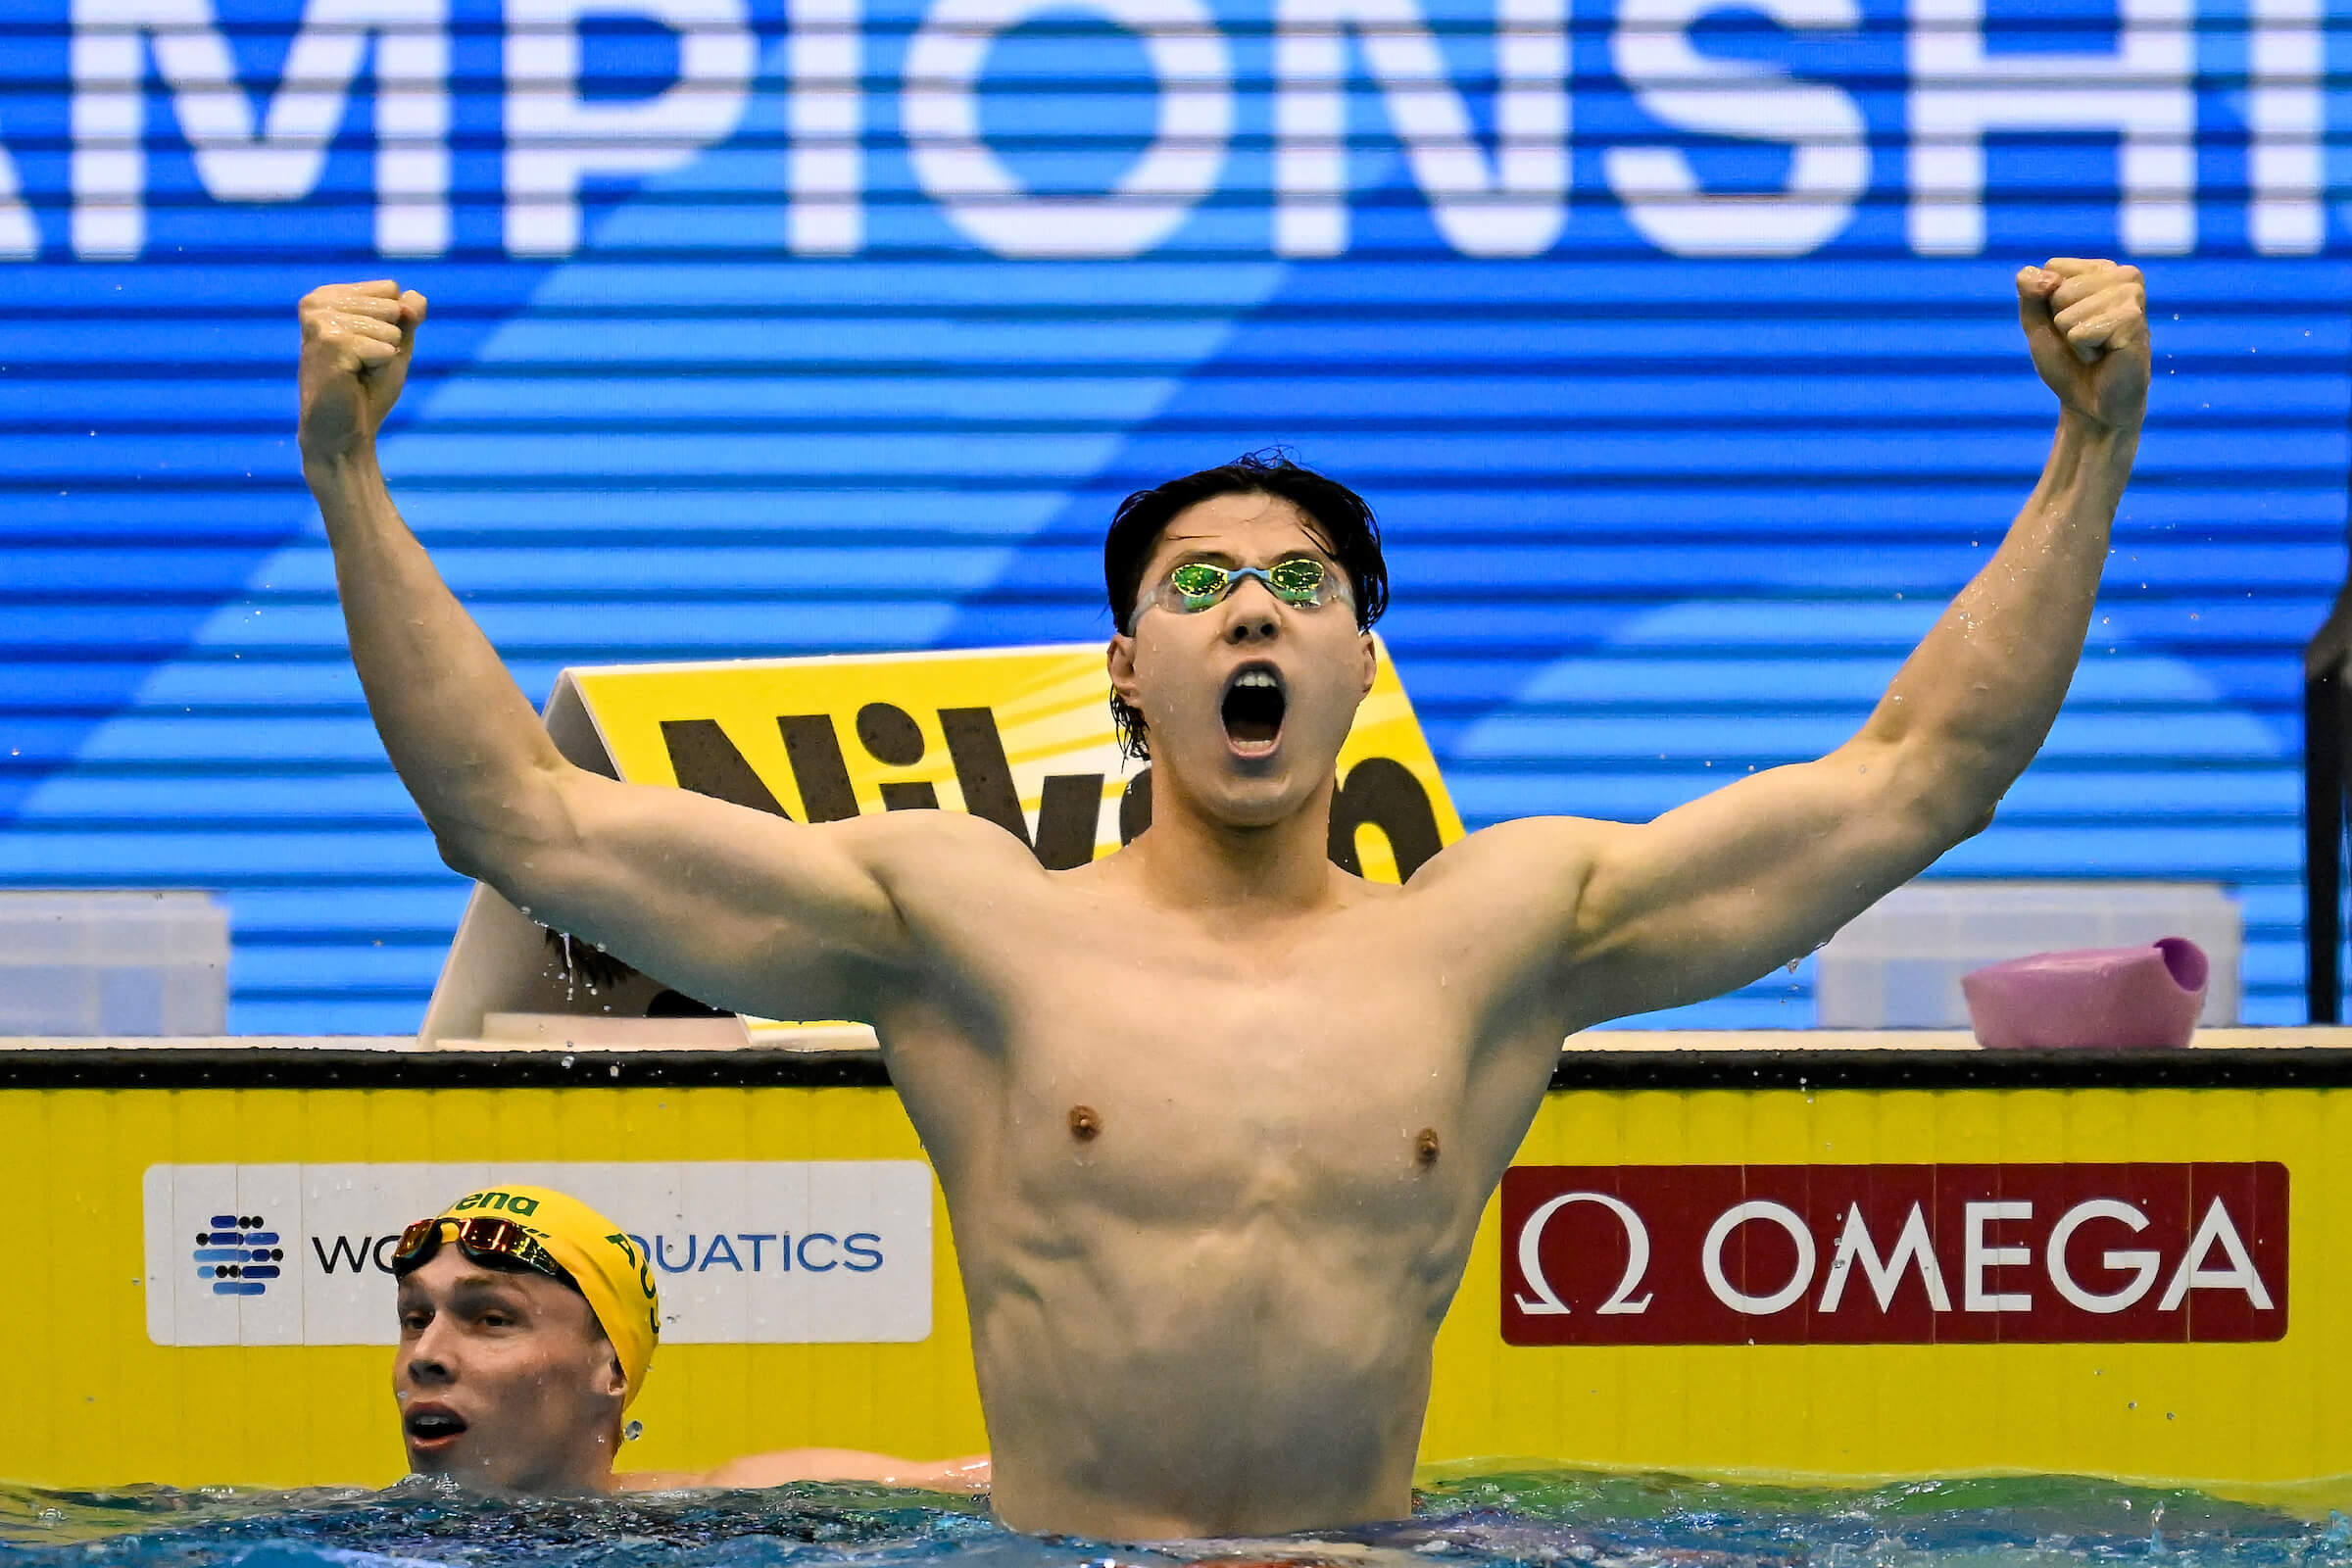 Qin Haiyang Completes Breaststroke Sweep With World Record